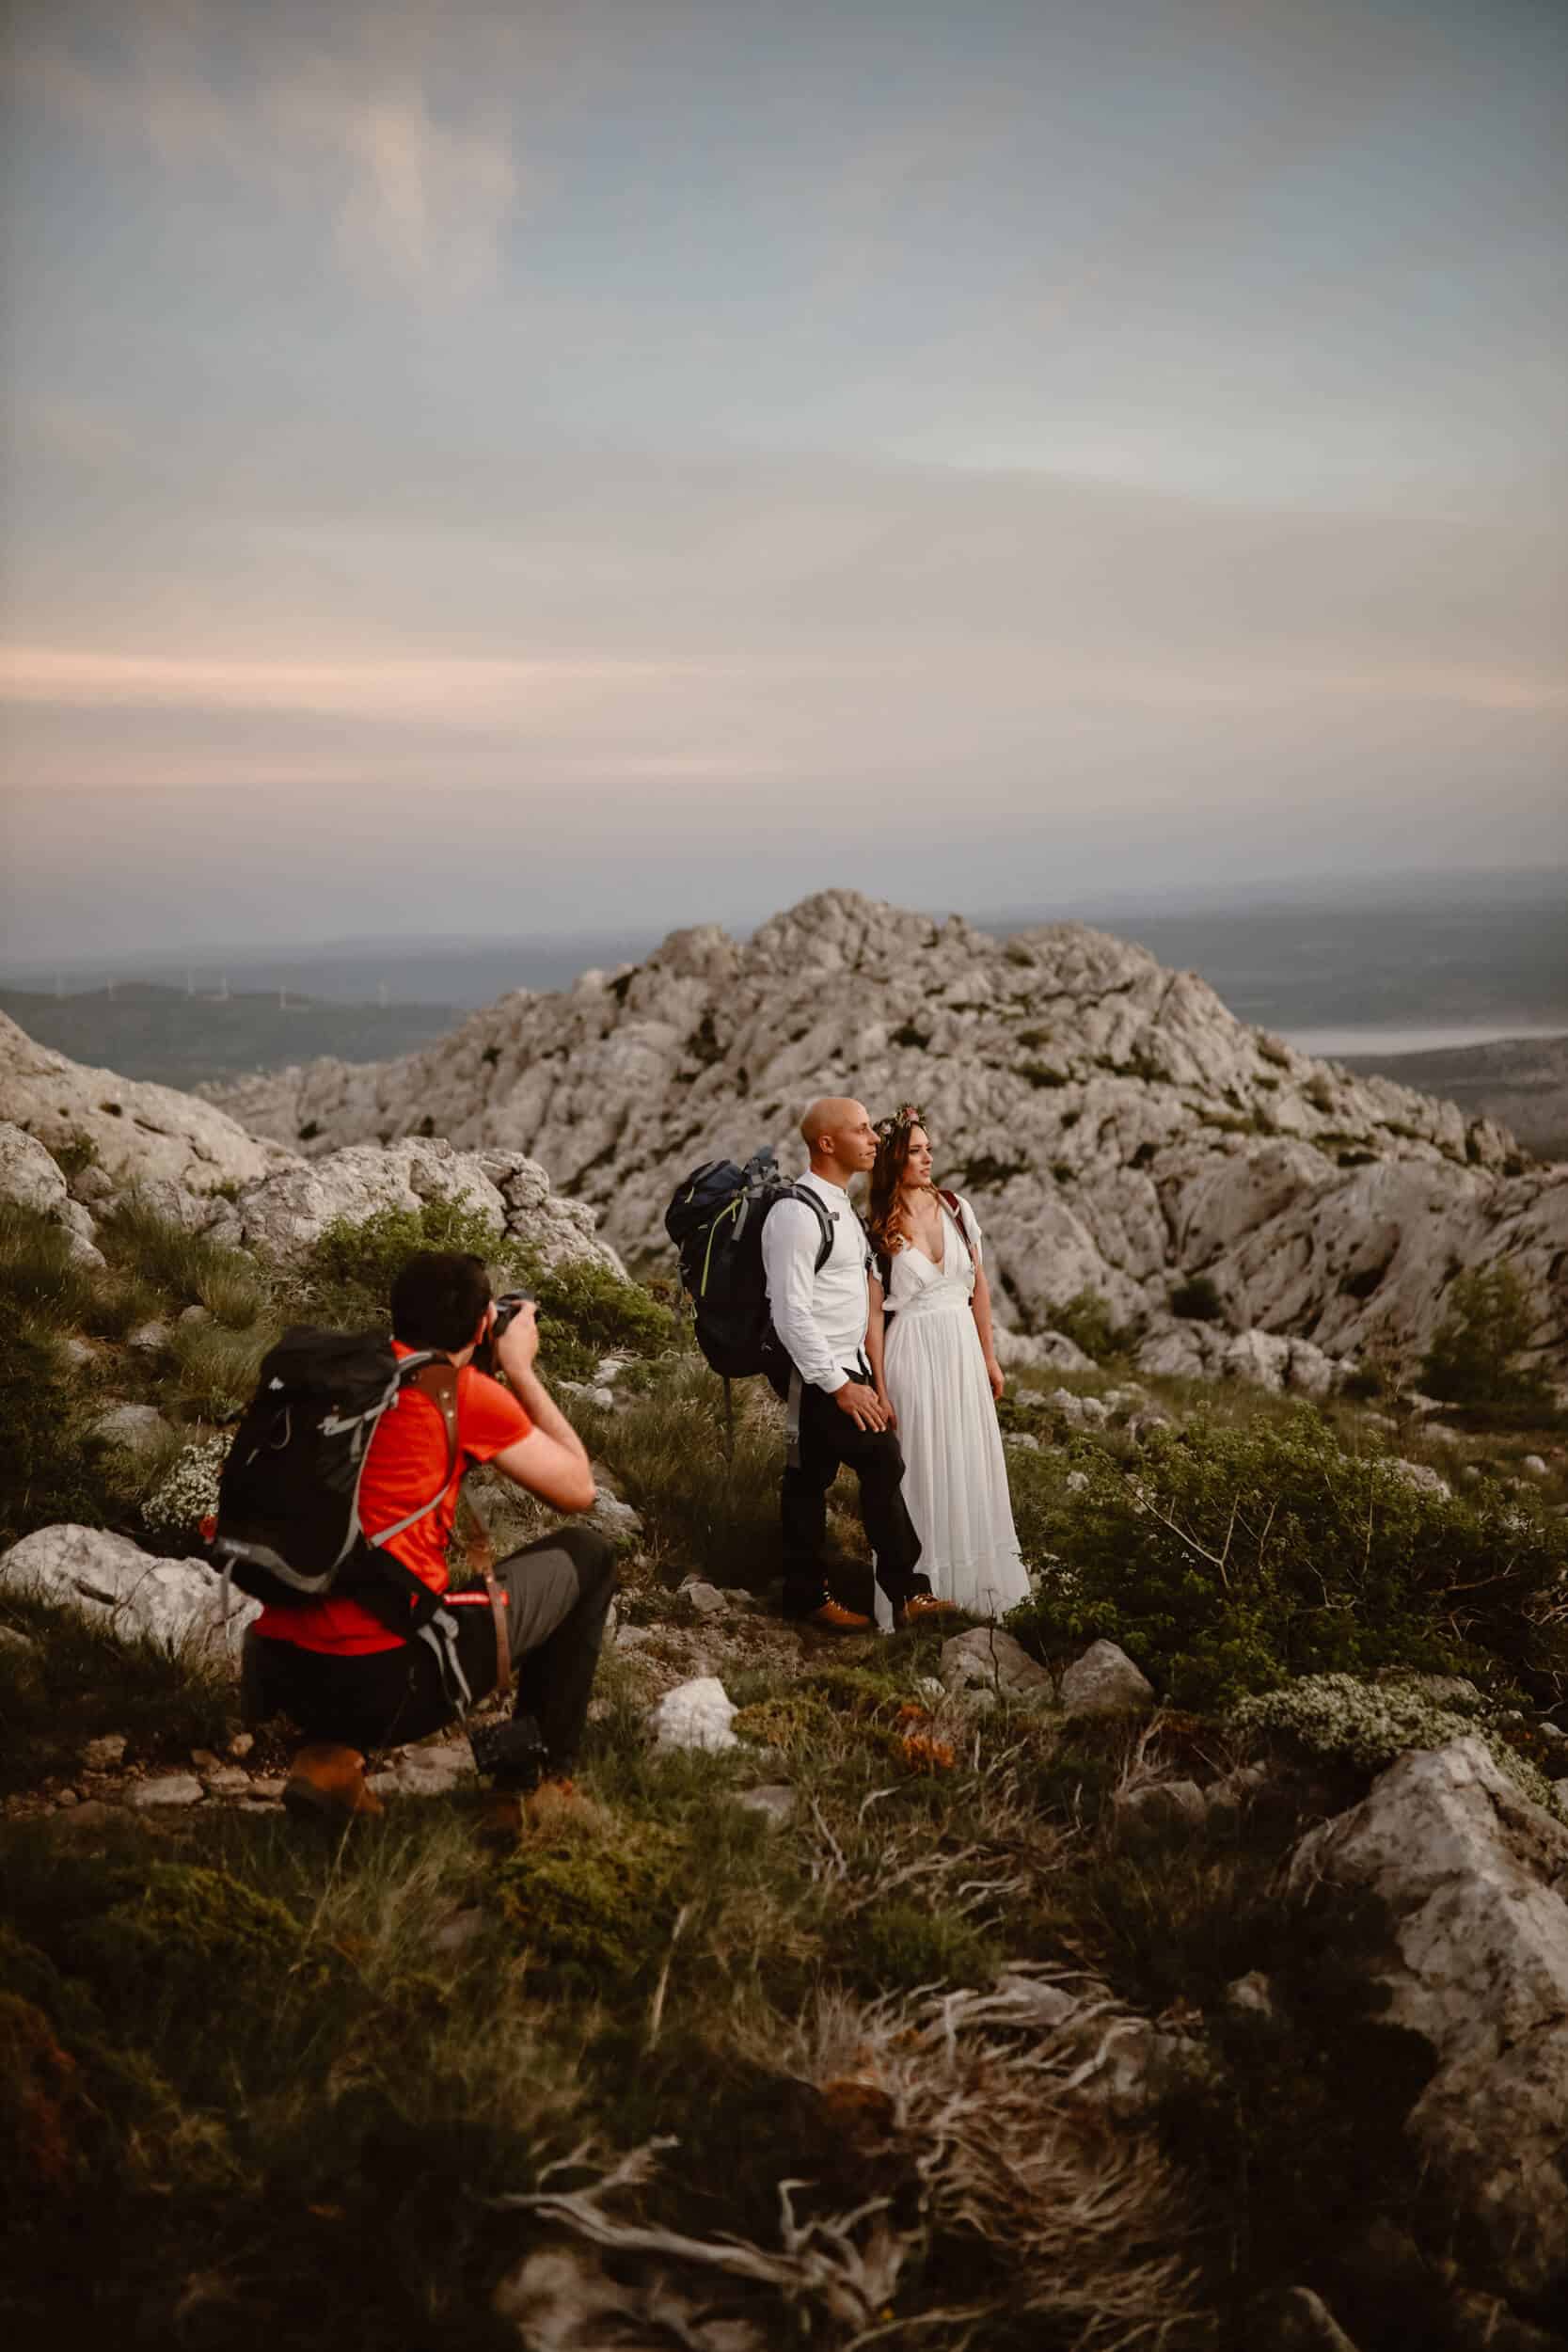 Europe adventure elopement photographer: 5 tips to help you choose the best one